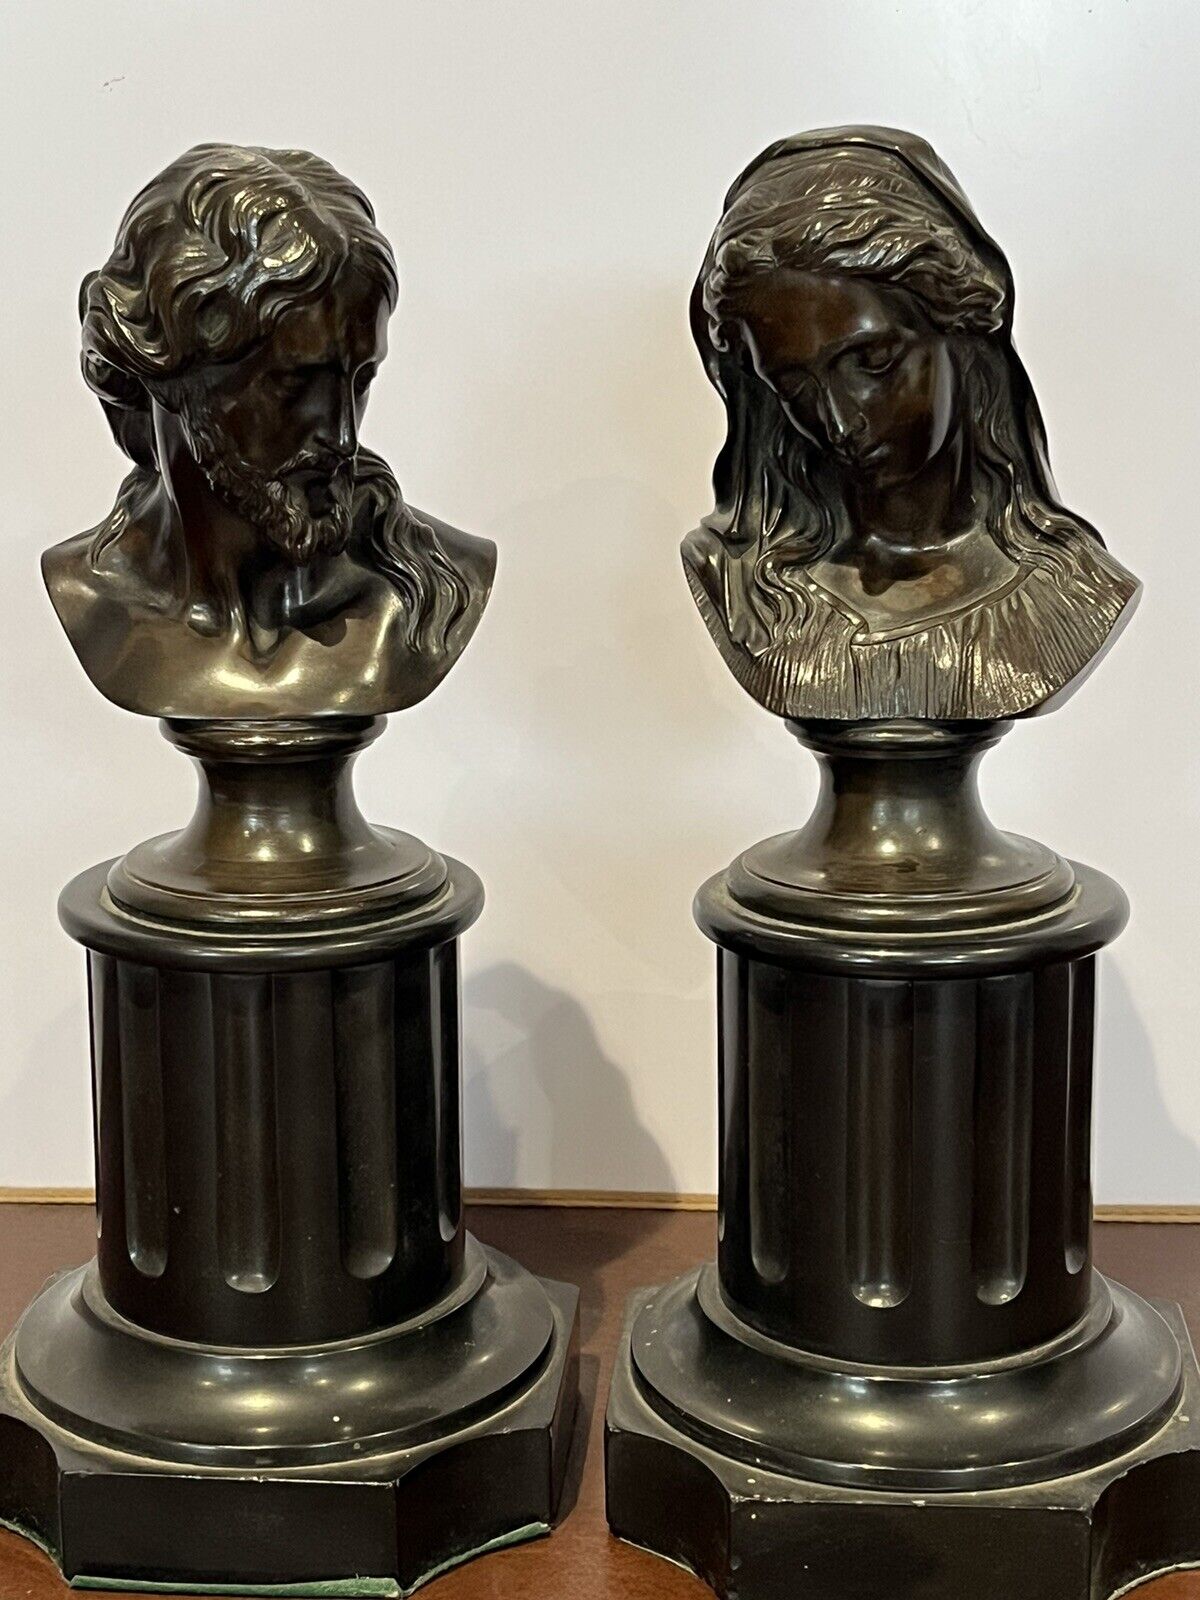 Grand Tour Antique Bronze Pair Of Busts, Signed And Dated 1852